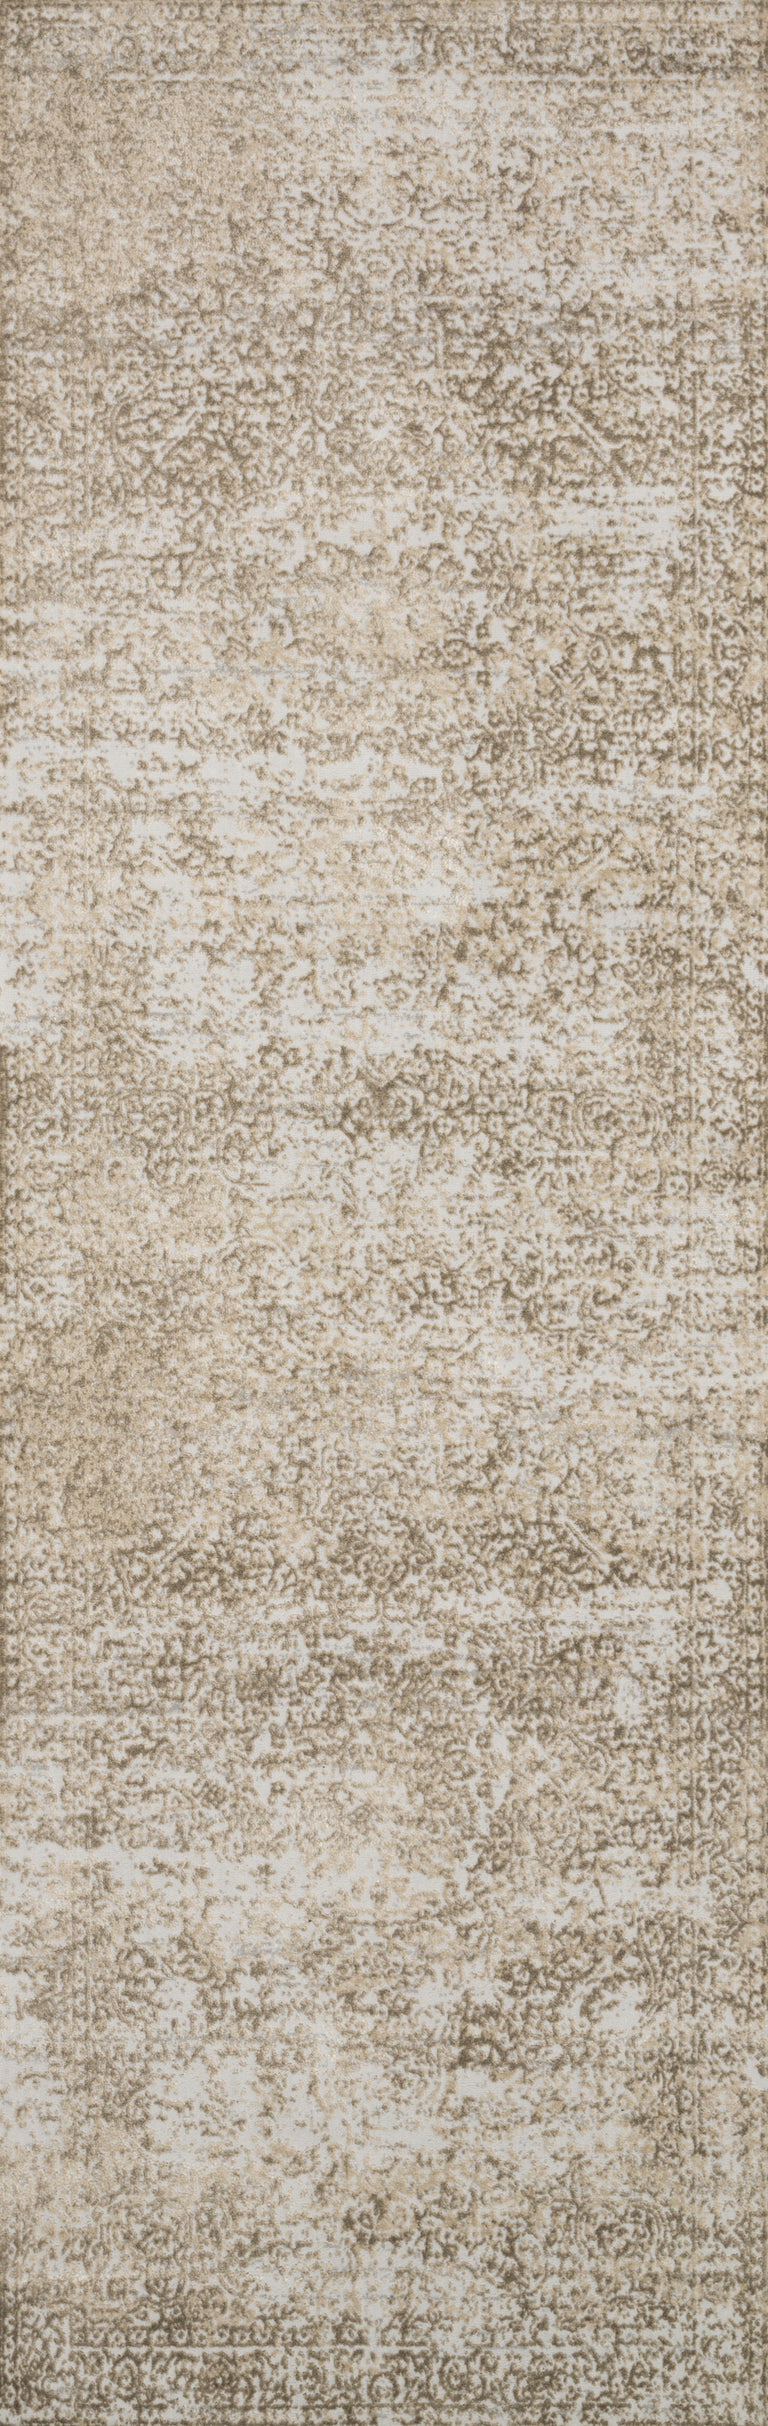 Loloi Rugs Patina Collection Rug in Champagne, Lt. Grey - 12'0" x 15'0"